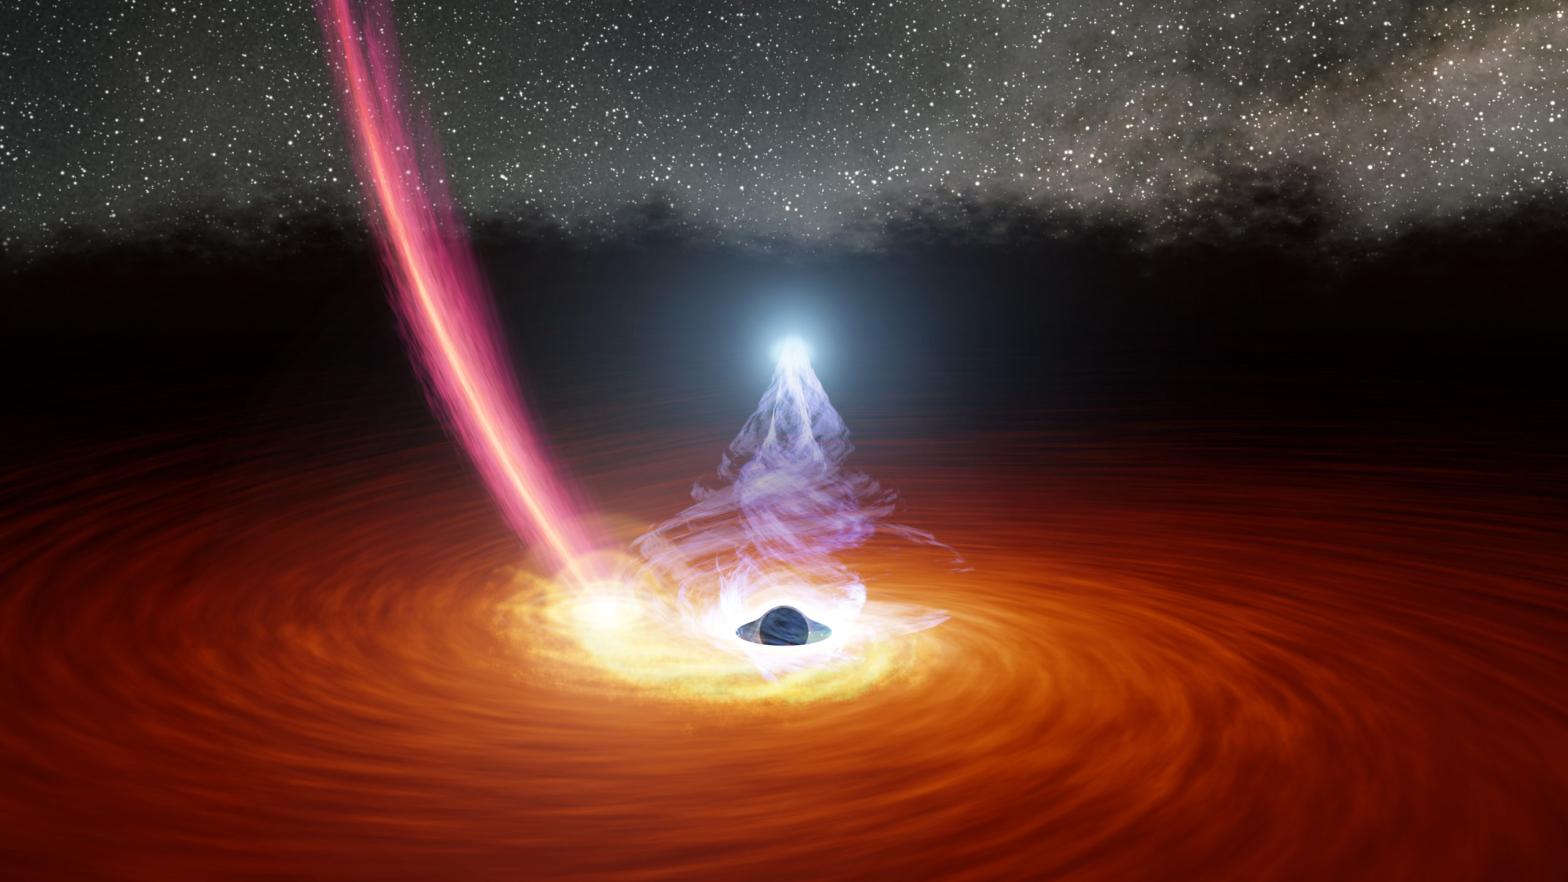 Artistic conception: The supermassive black hole surrounded by a disk of hot gas and the X-ray corona (shown in bluish-white). The pinkish streak is debris falling into the black hole — the shattered remains of a runaway star.  (Image: NASA/JPL-Caltech)